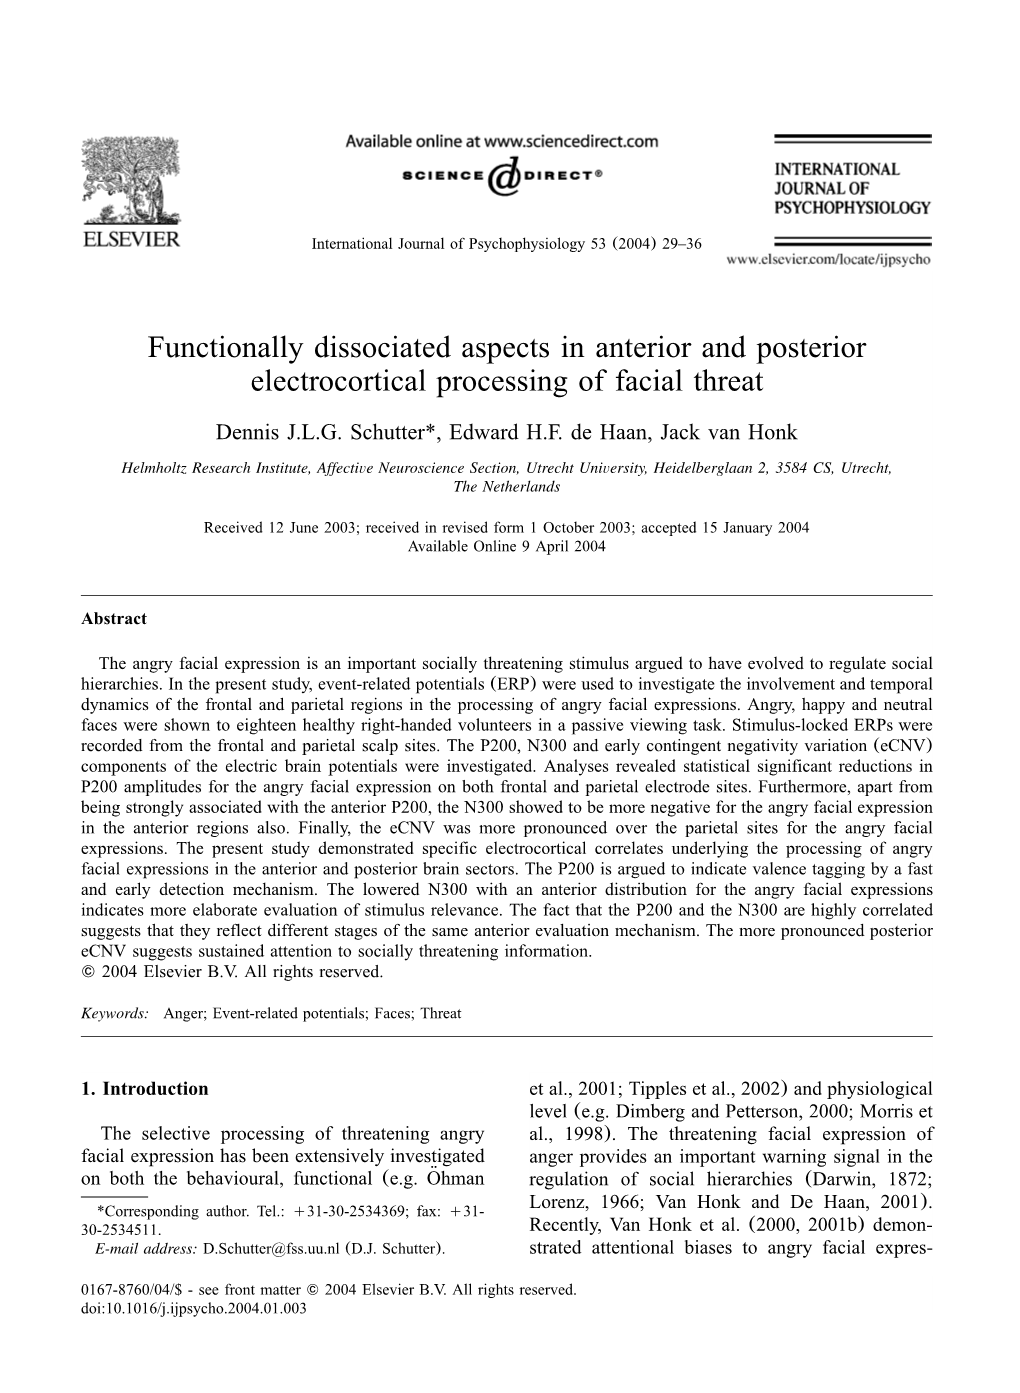 Functionally Dissociated Aspects in Anterior and Posterior Electrocortical Processing of Facial Threat